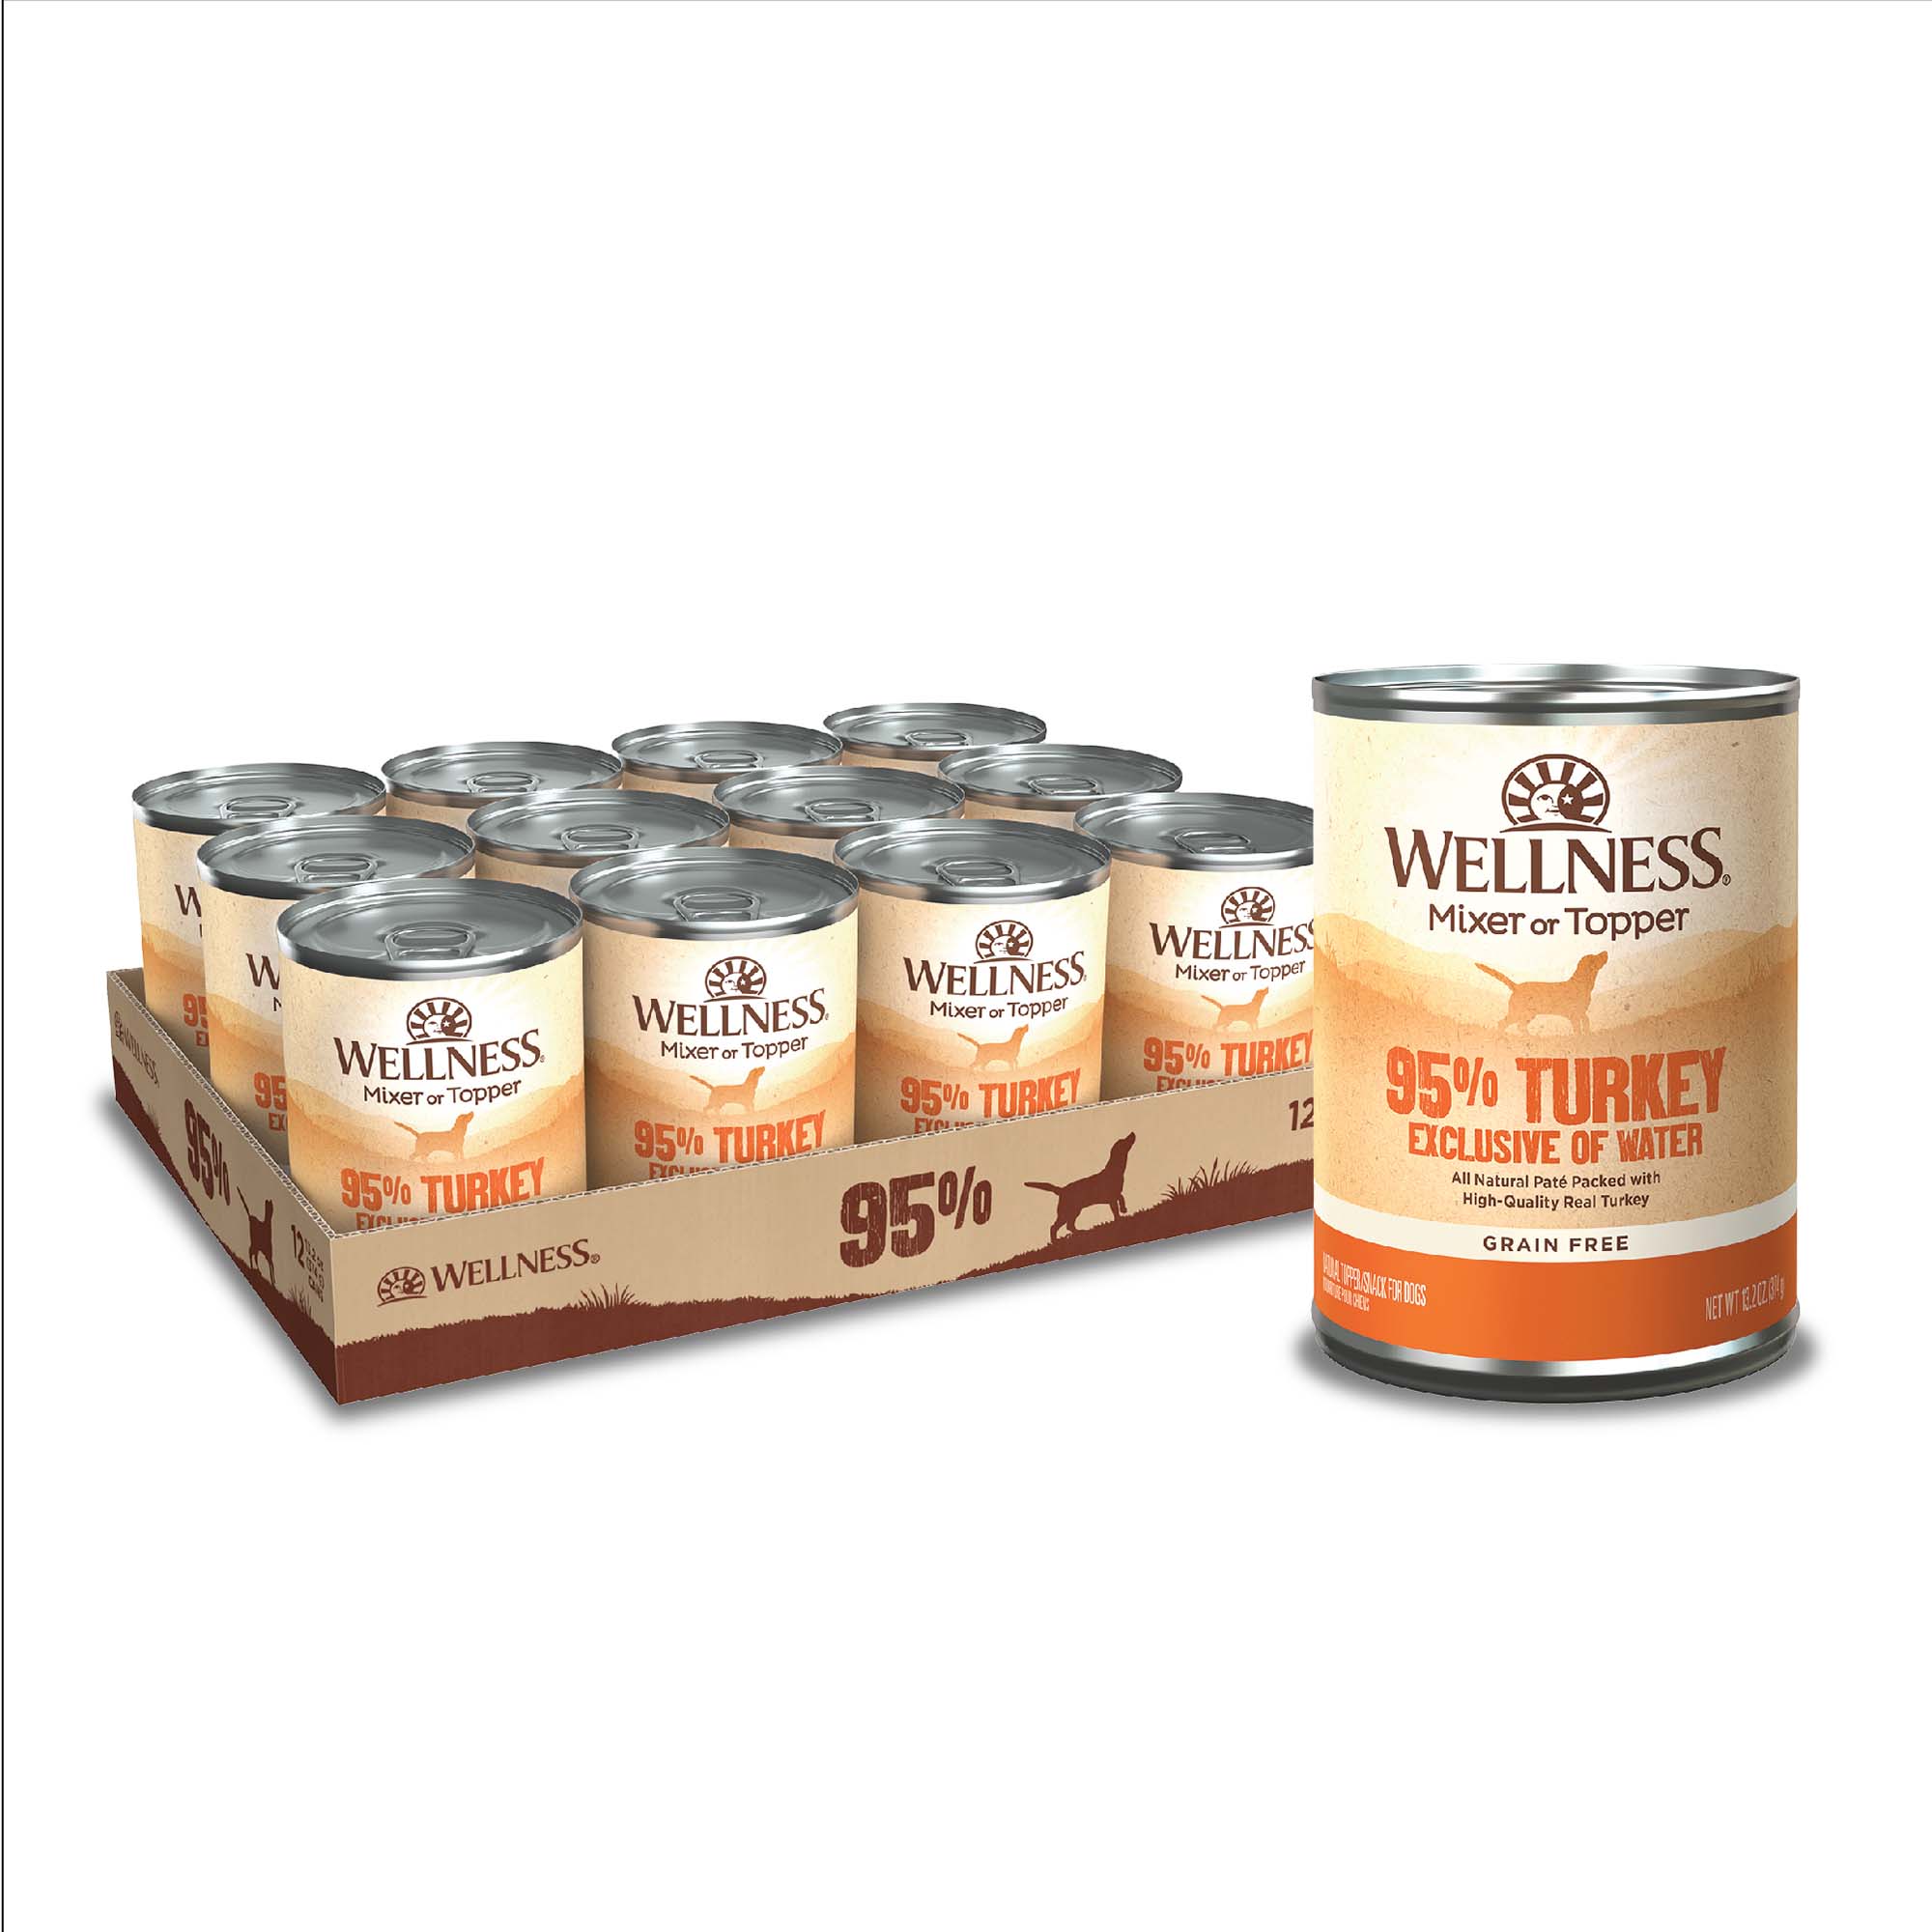 Wellness 95% Turkey Natural Wet Grain Free Canned Dog Food, 13.2-Ounce Can (Pack of 12) - image 1 of 8